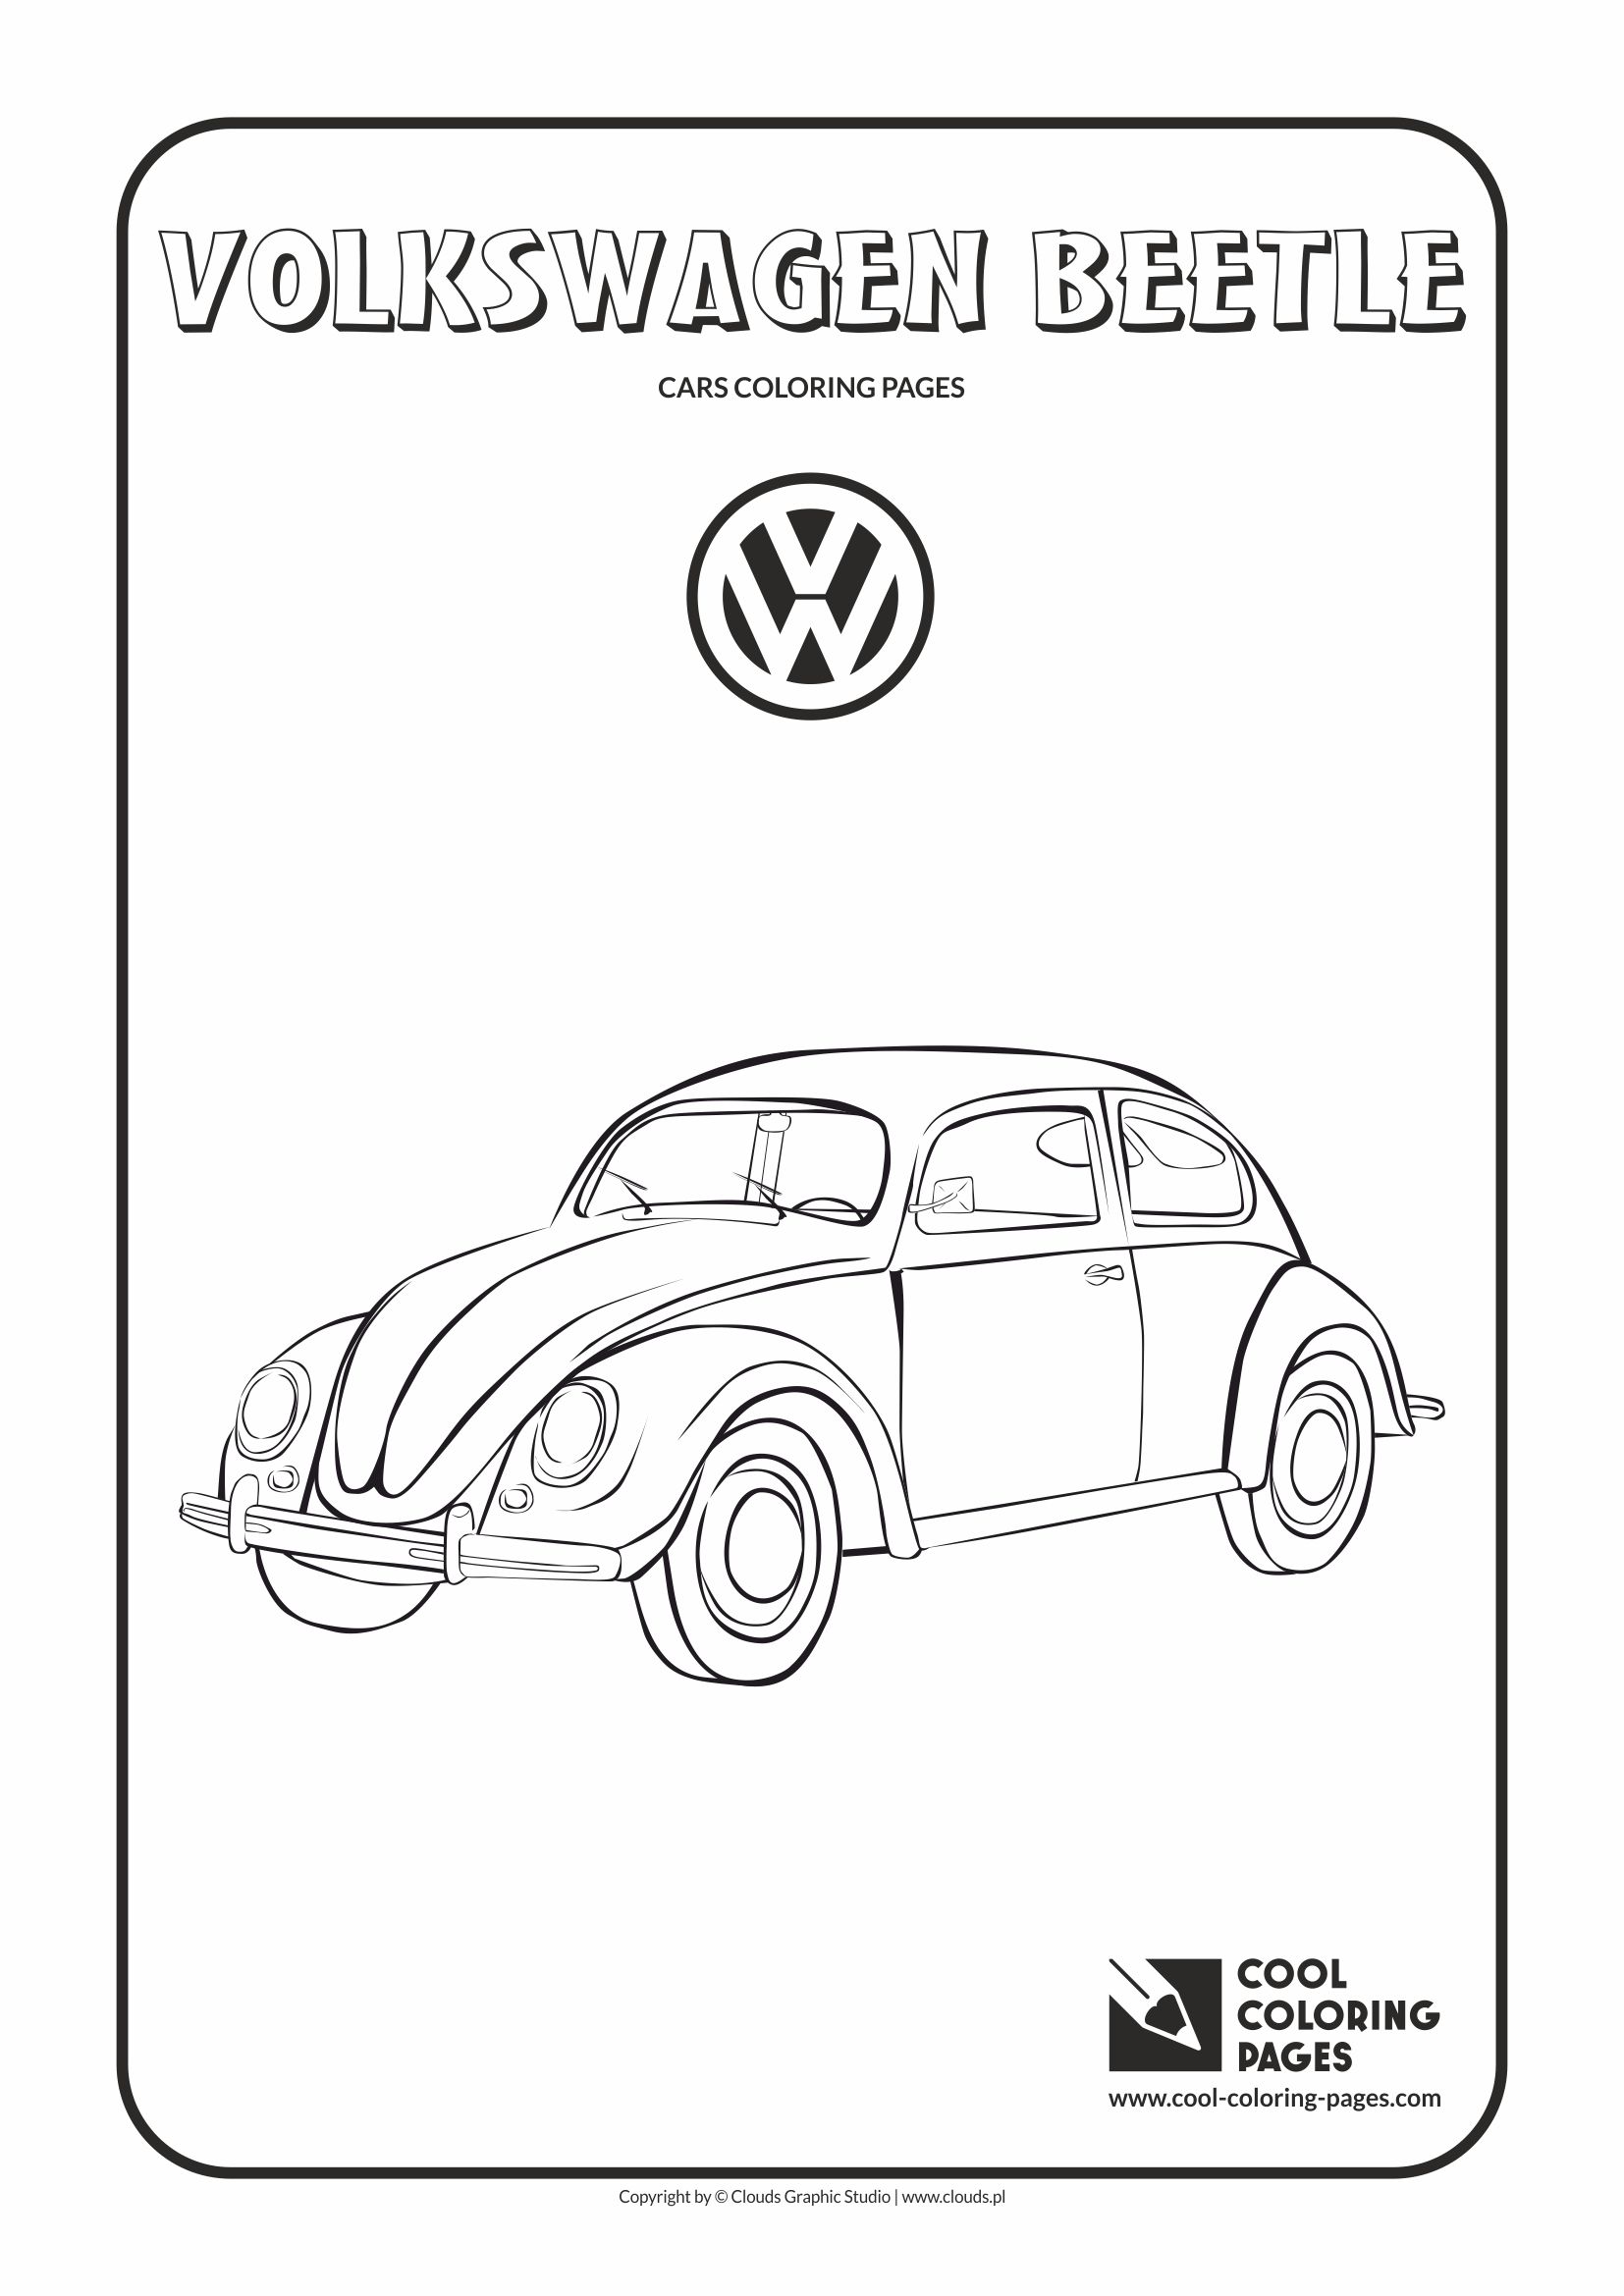 Cars Coloring Pages Cool Vehicles Volkswagen Beetle Page Book